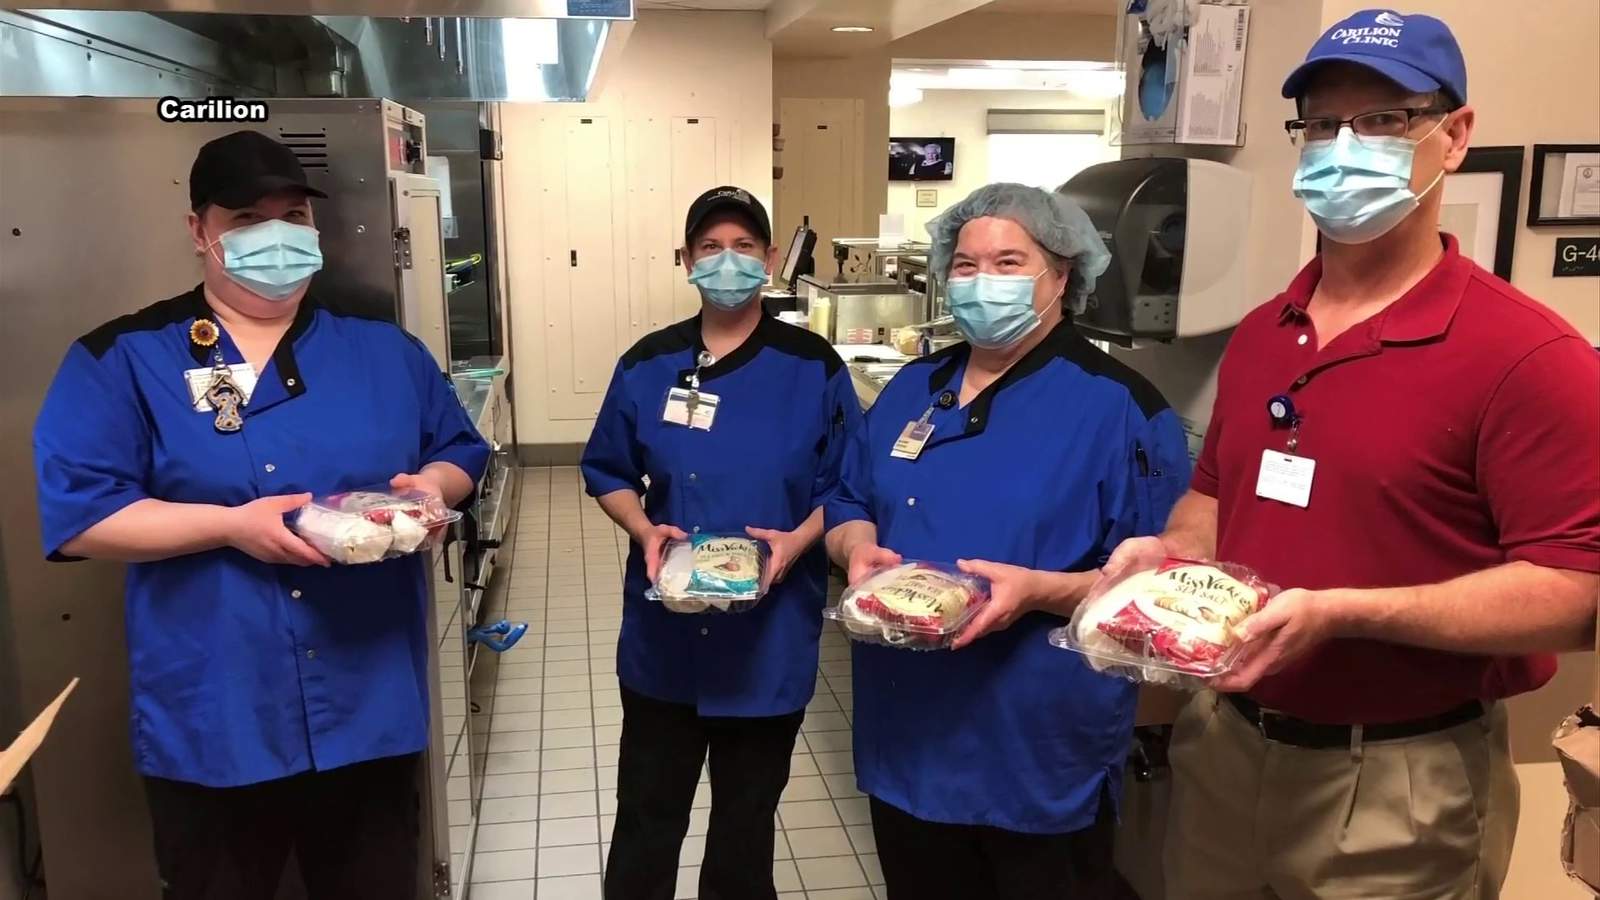 Food for Frontline delivers food to Carilion Stonewall Jackson Hospital